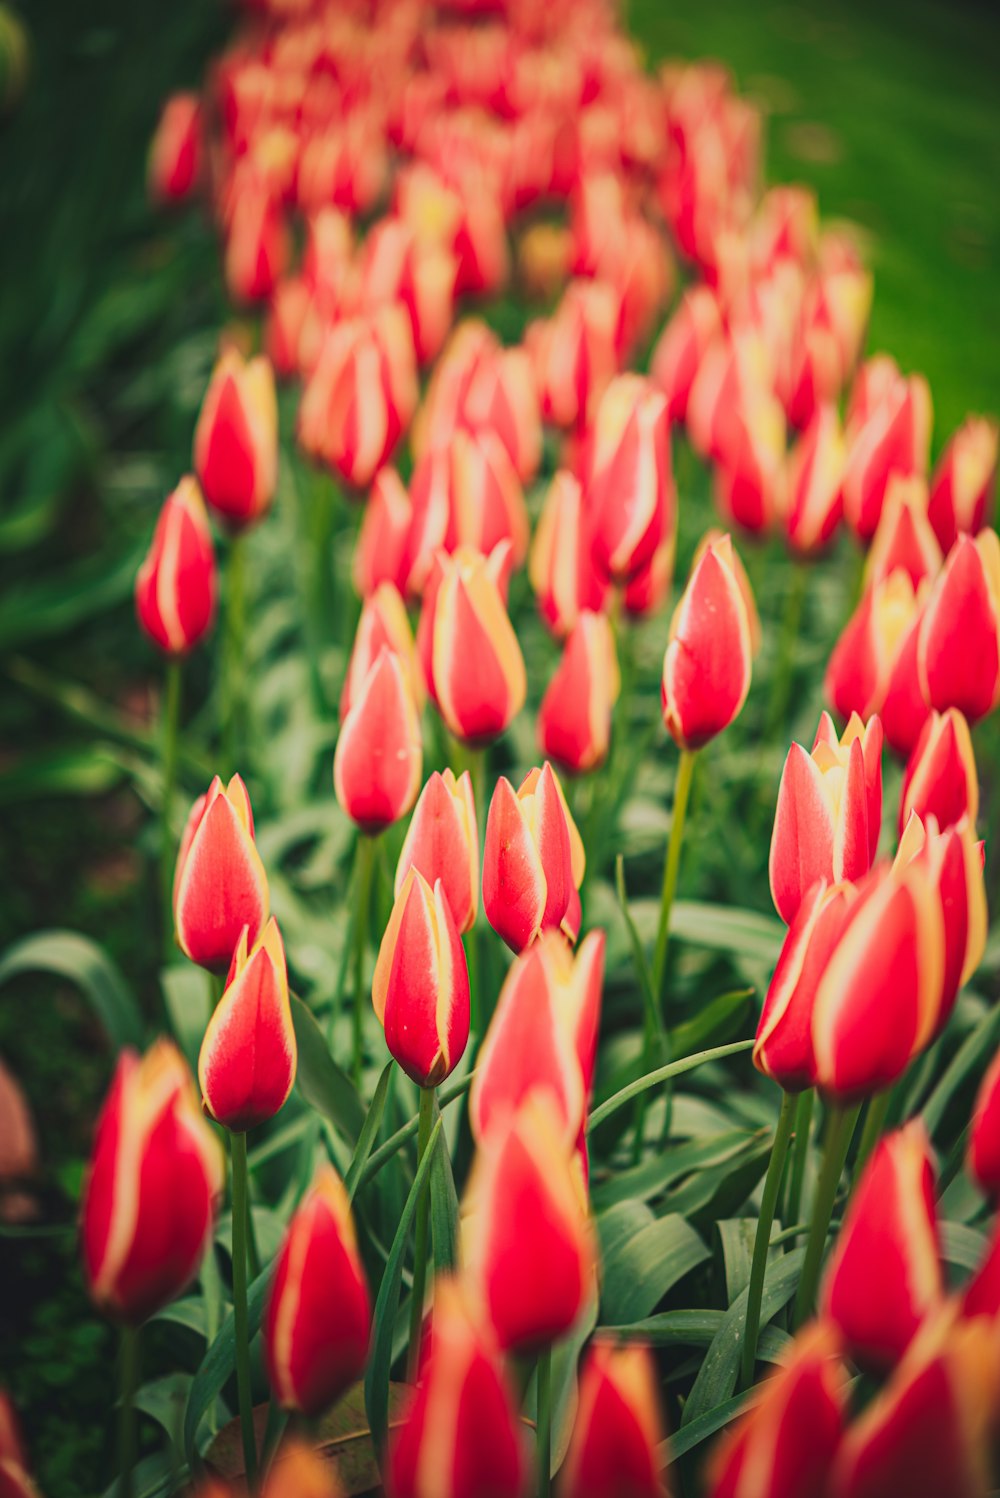 a field of red and yellow tulips in a garden